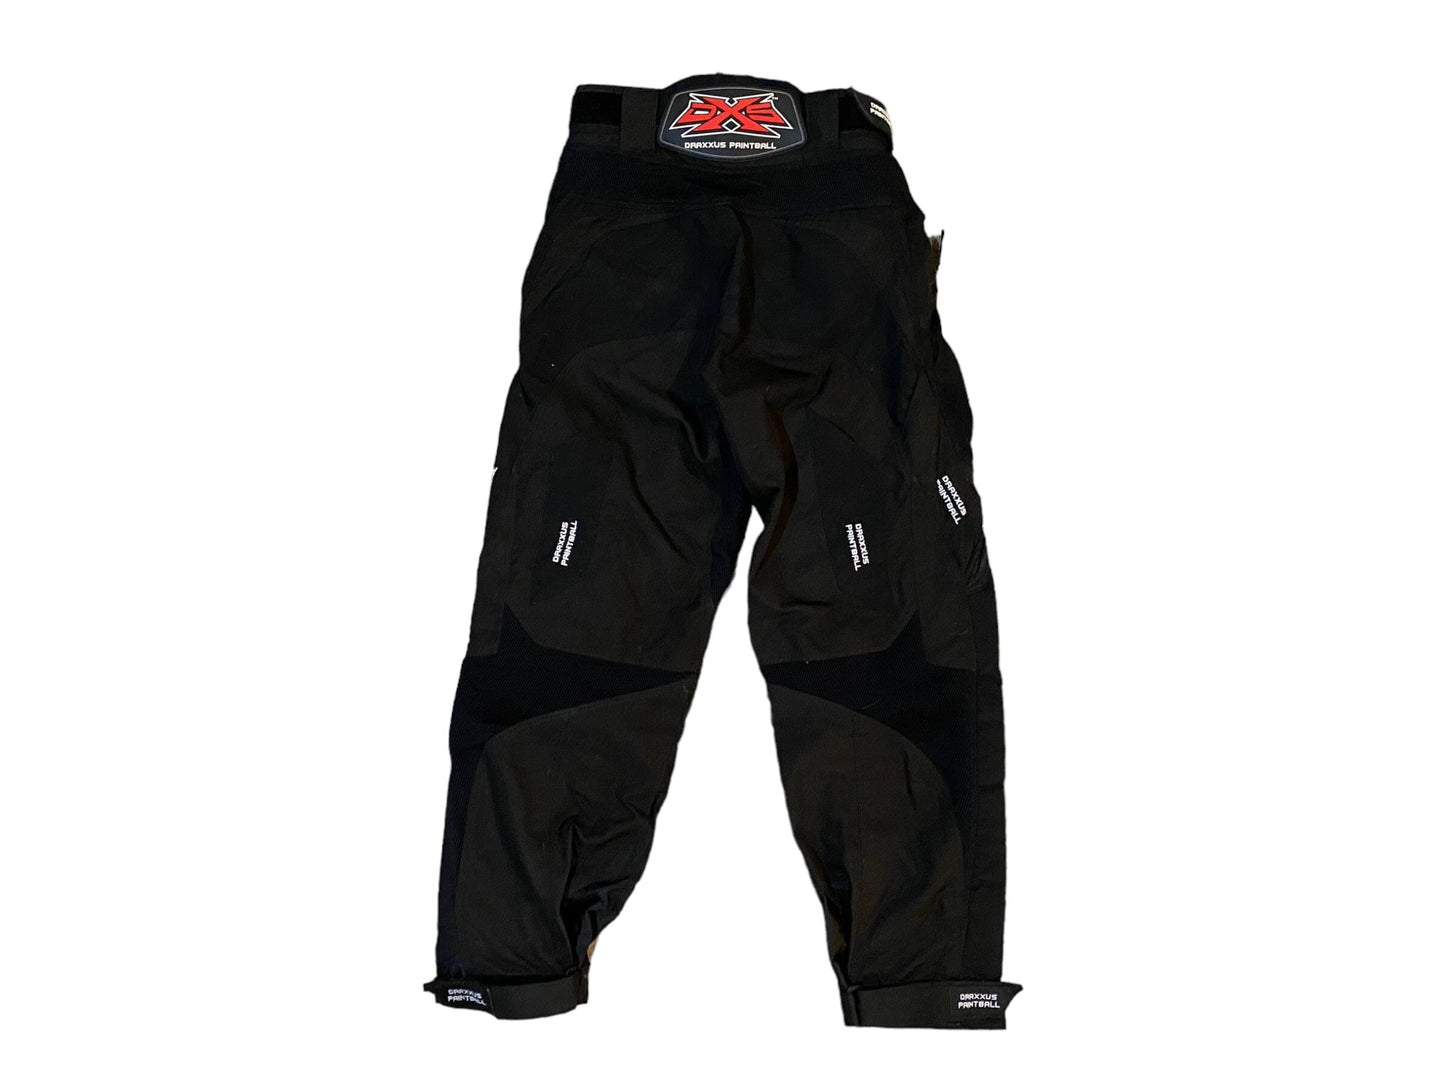 Used Draxxus Paintball Pants - size M Paintball Gun from CPXBrosPaintball Buy/Sell/Trade Paintball Markers, Paintball Hoppers, Paintball Masks, and Hormesis Headbands